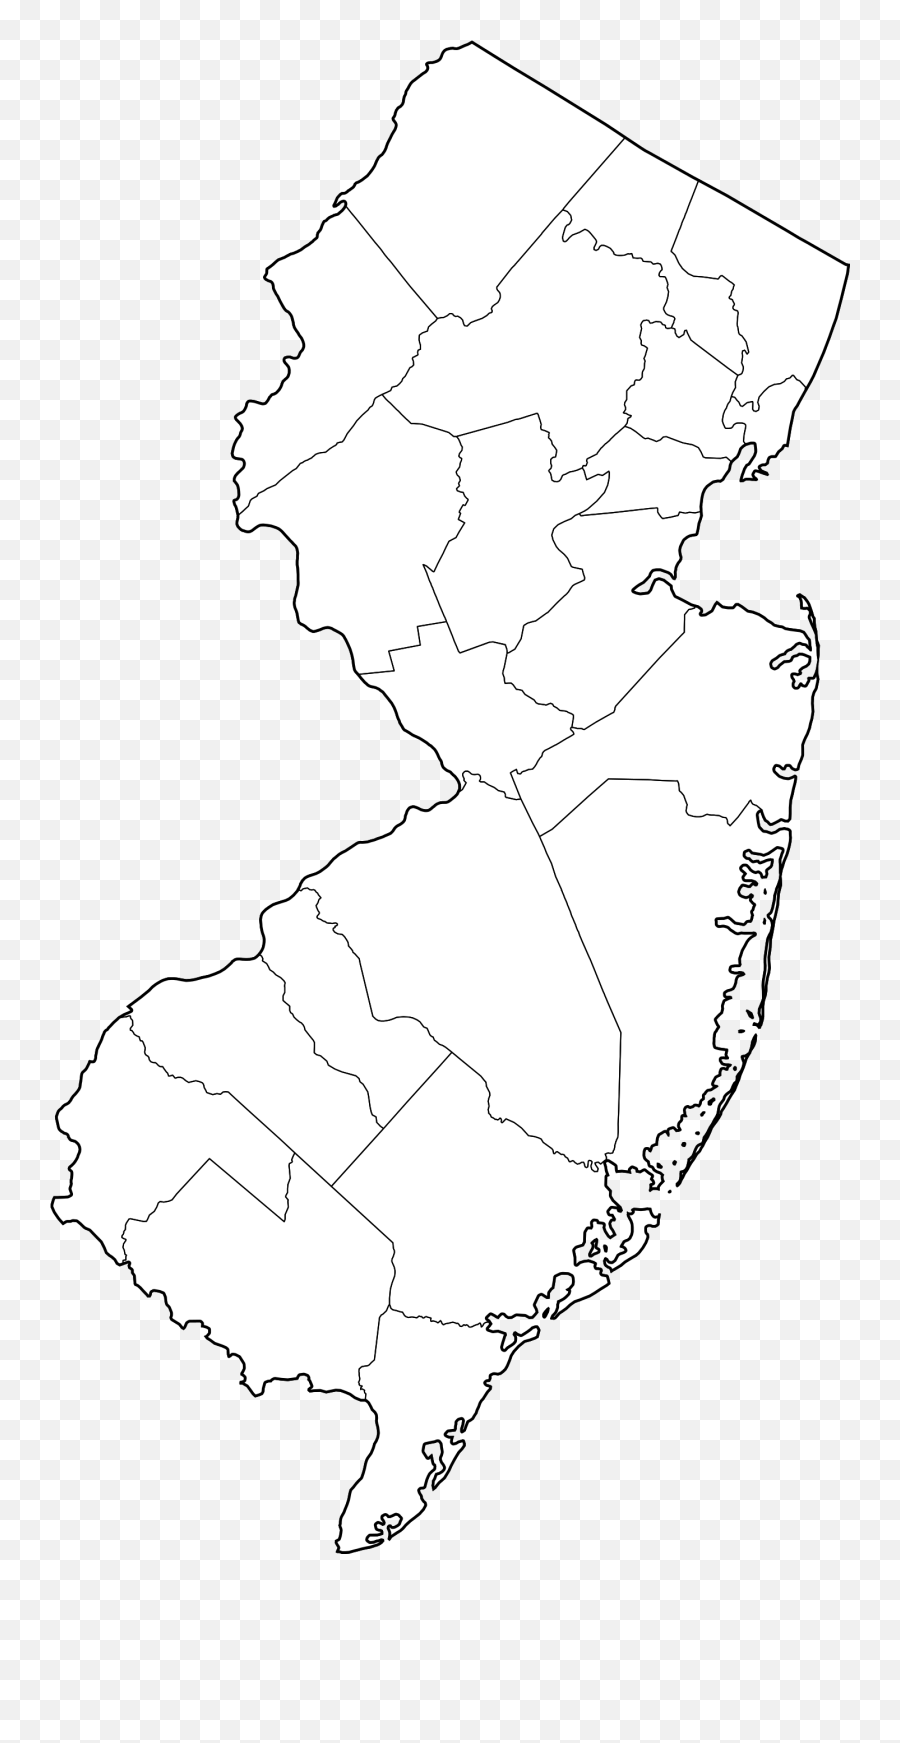 New Jersey Counties Outline - New Jersey Counties Outline Emoji,New Jersey Emoji